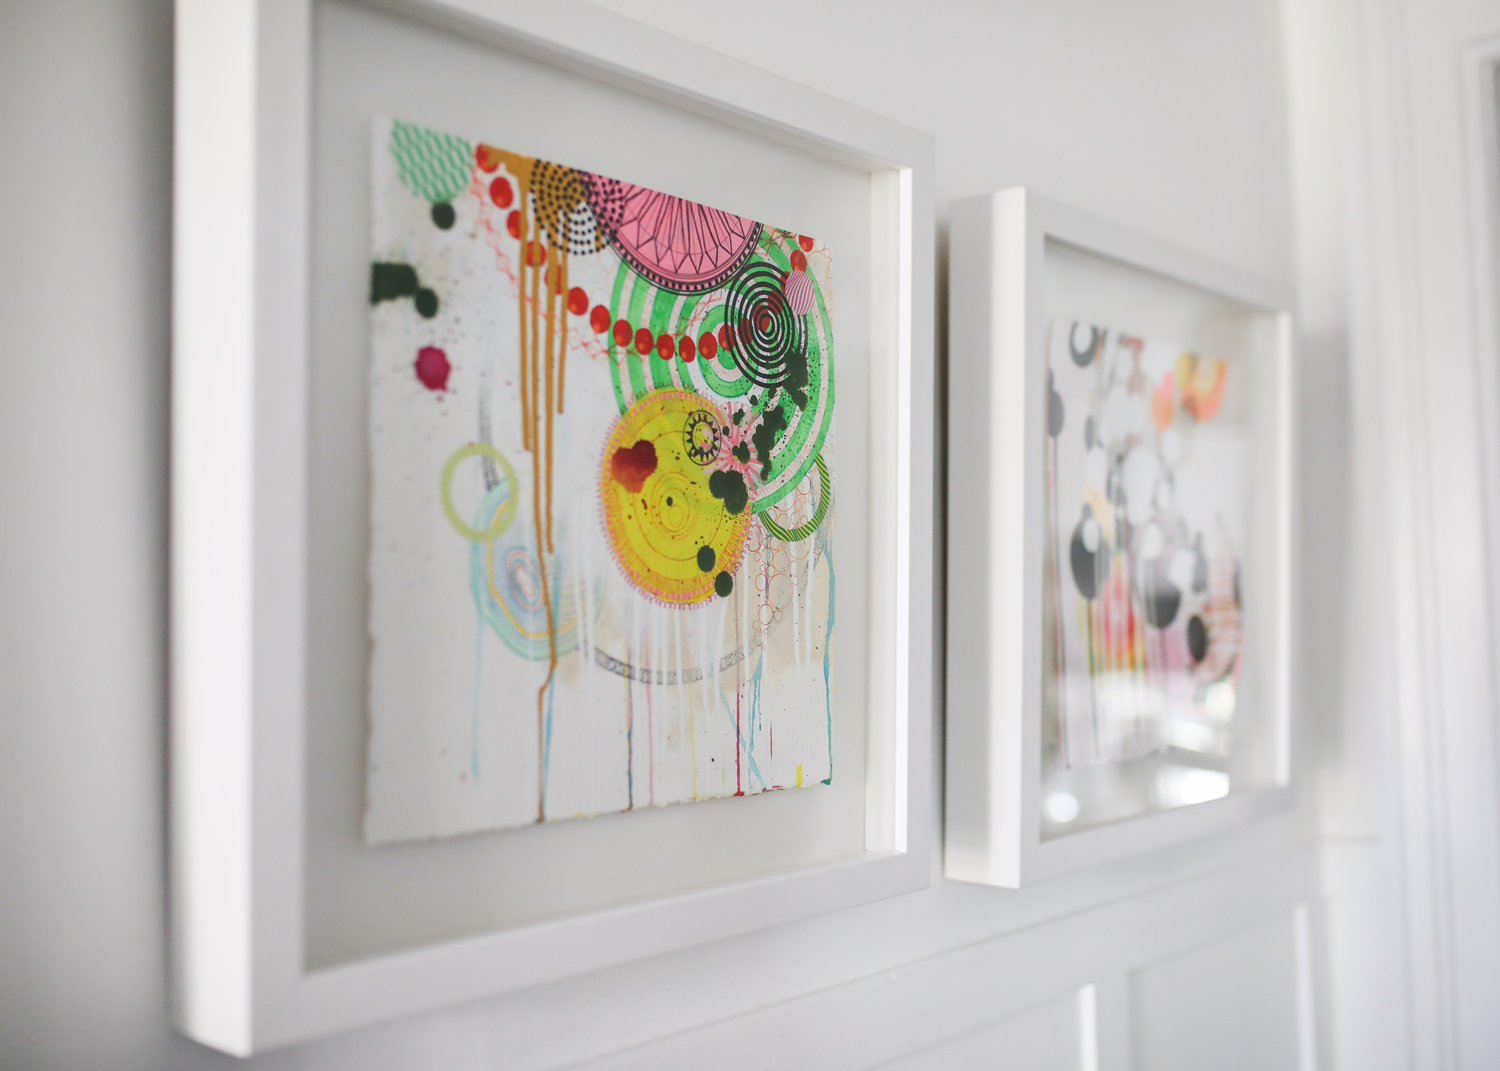 Colourful artwork in white frames hanging on wall